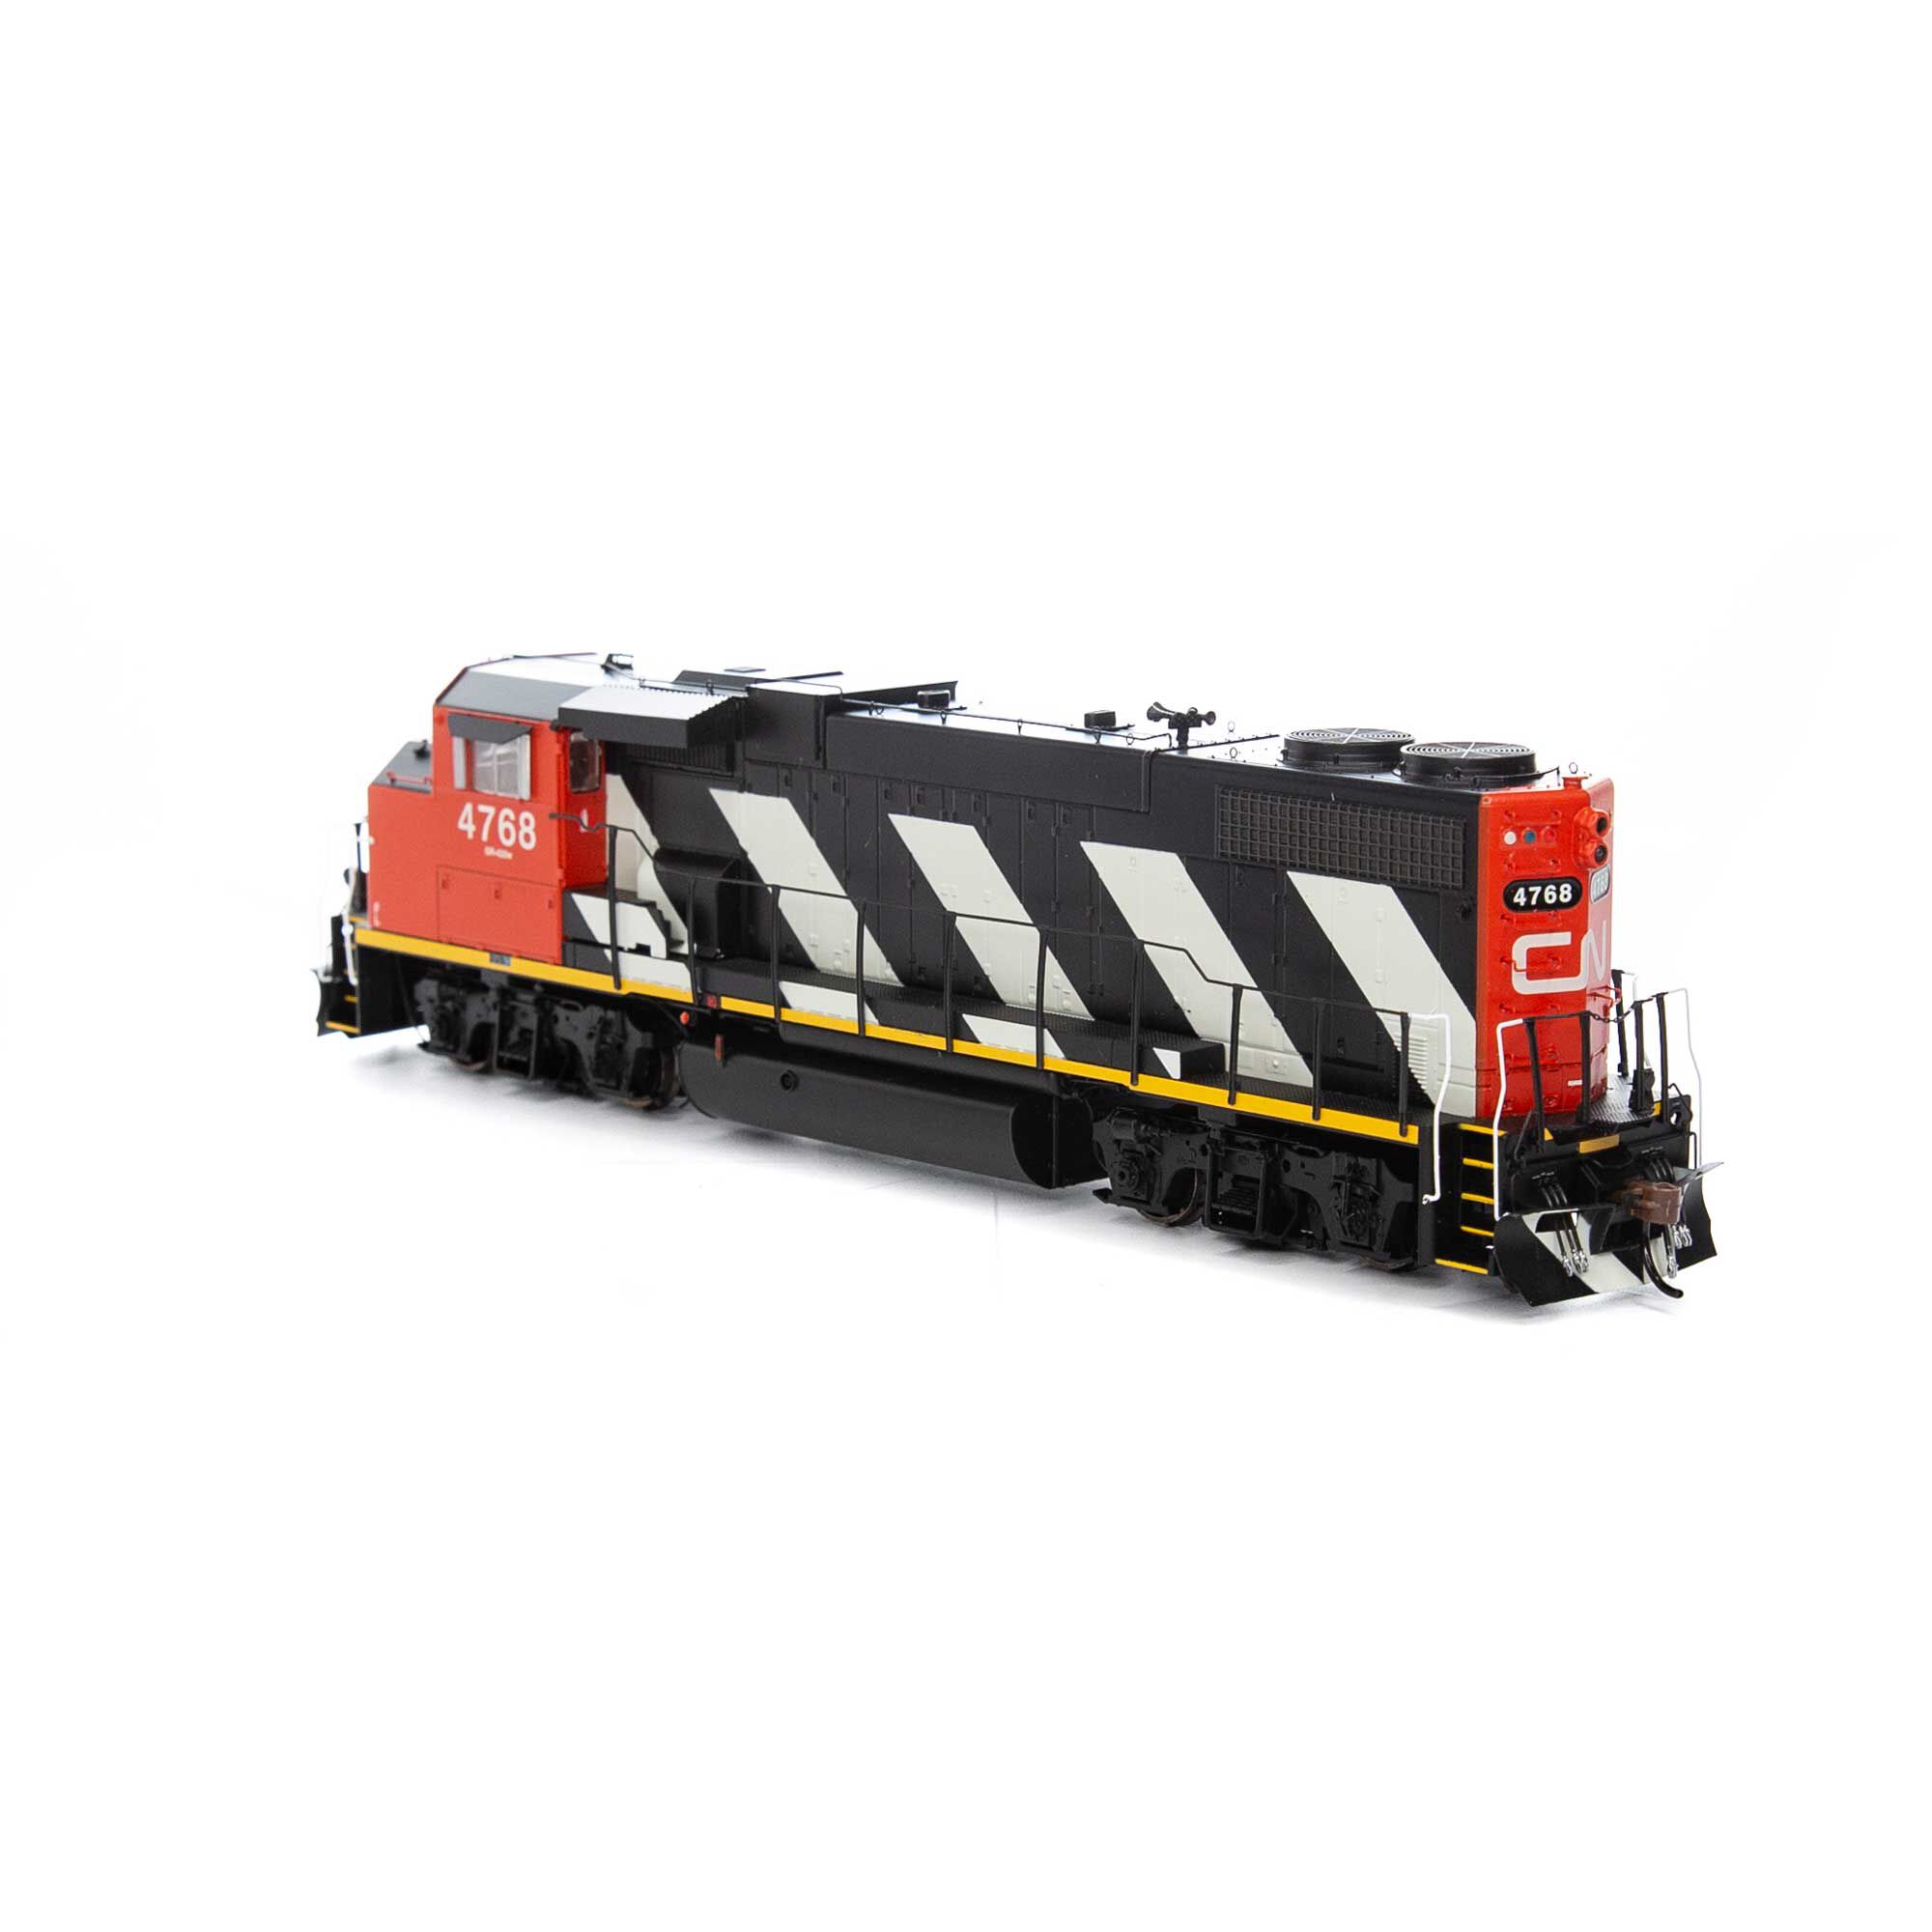 w Athearn HO Gp38-2 GMD CN #4768 Athg65391 for sale online 